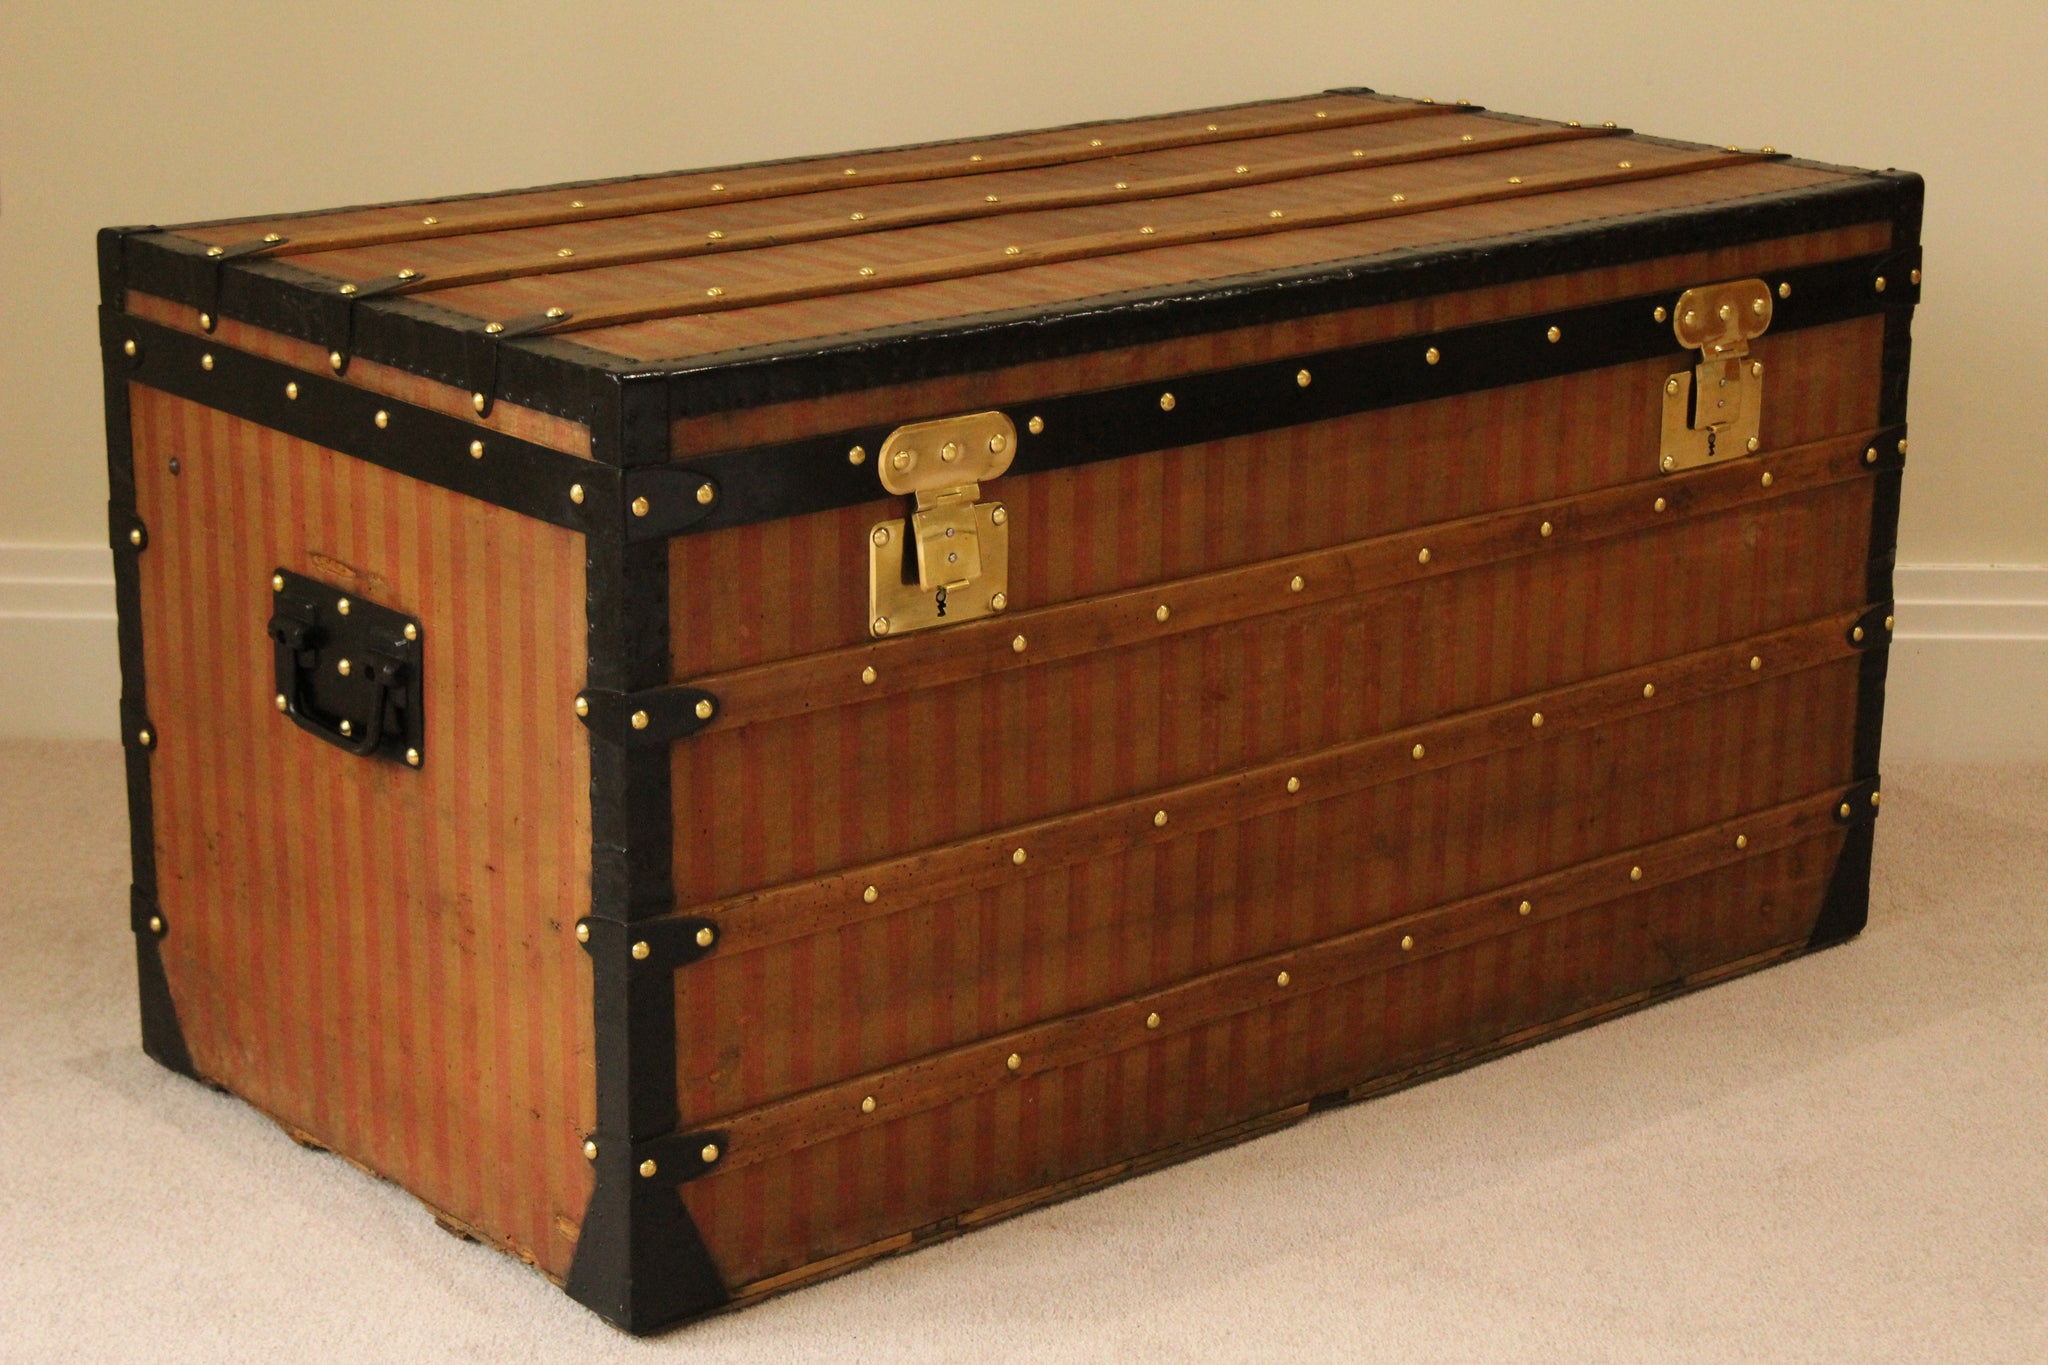 Striped Canvas Trunk from Louis Vuitton, 1876